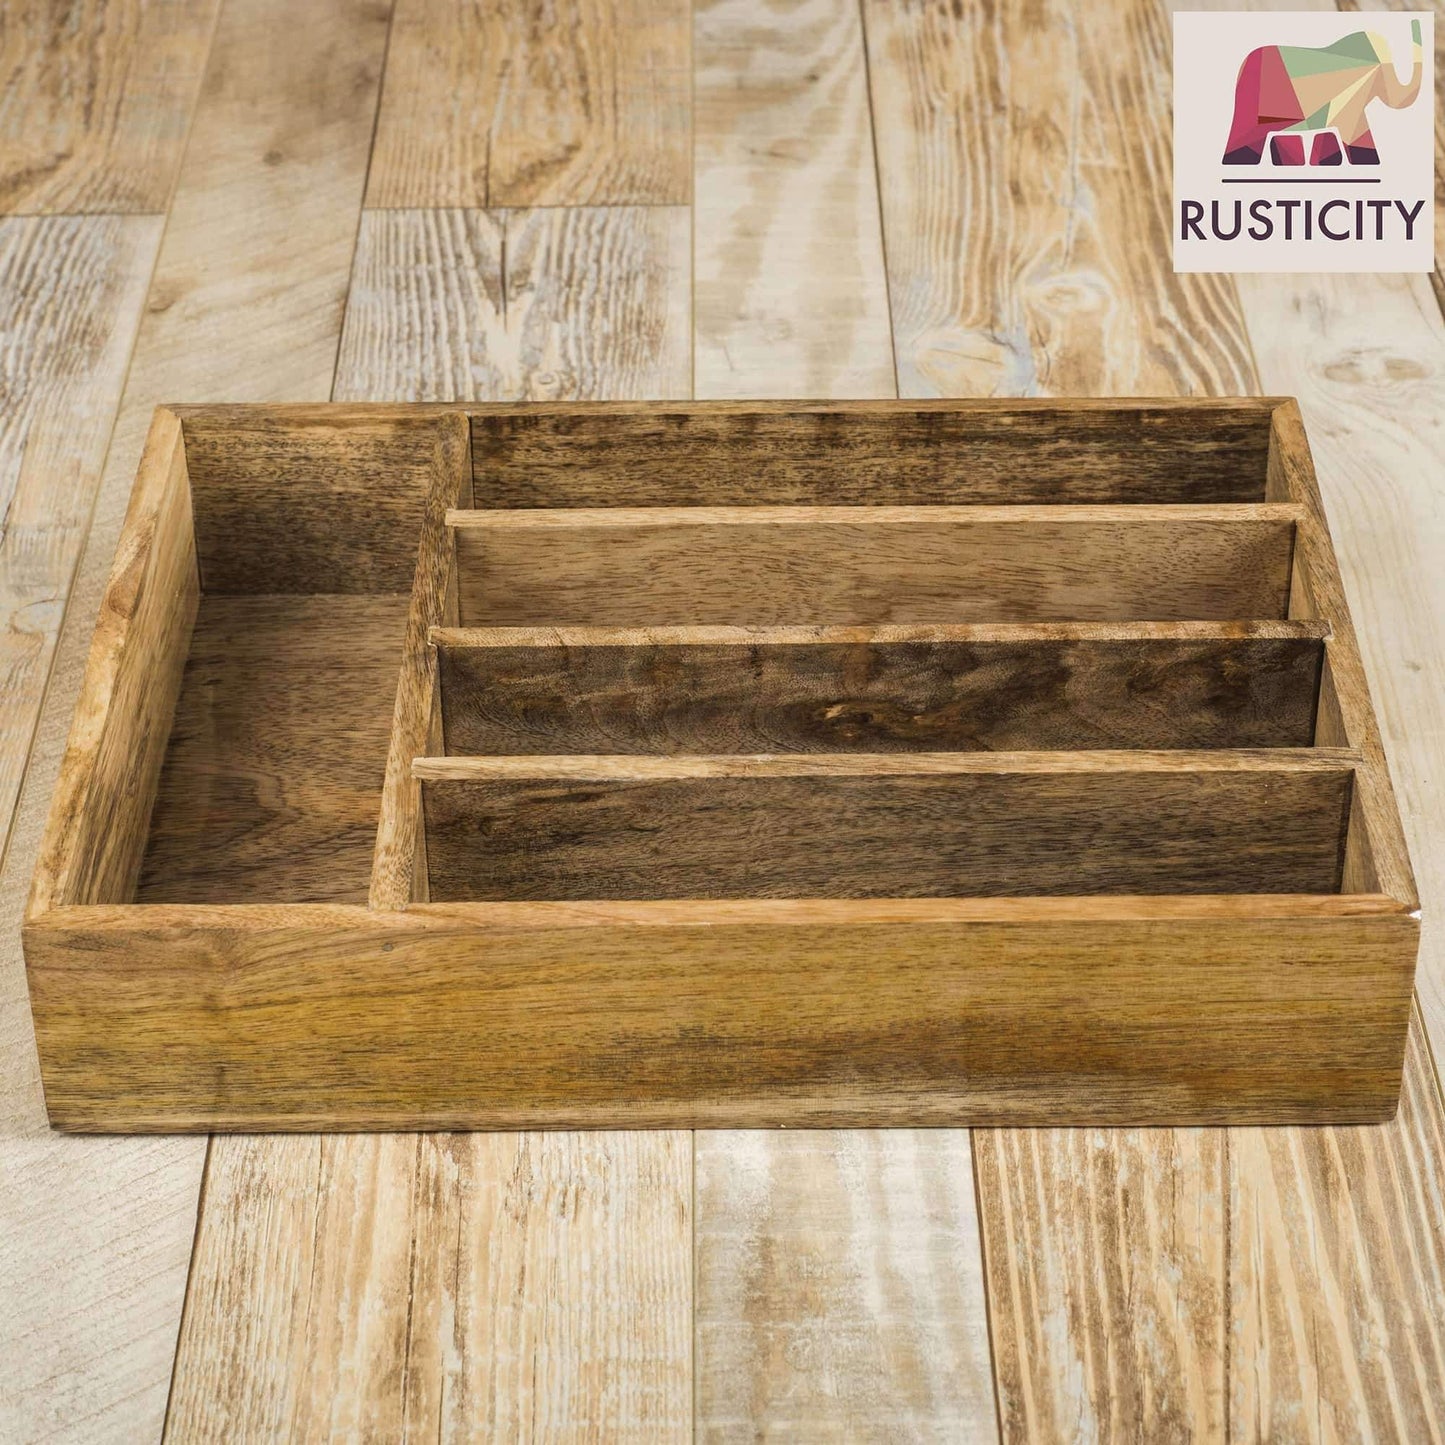 Selection rusticity wooden utensil drawer organizer with 5 compartments kitchen flatware cutlery tray organizer mango wood handmade 13 7 x 10 2 x 2 6 in